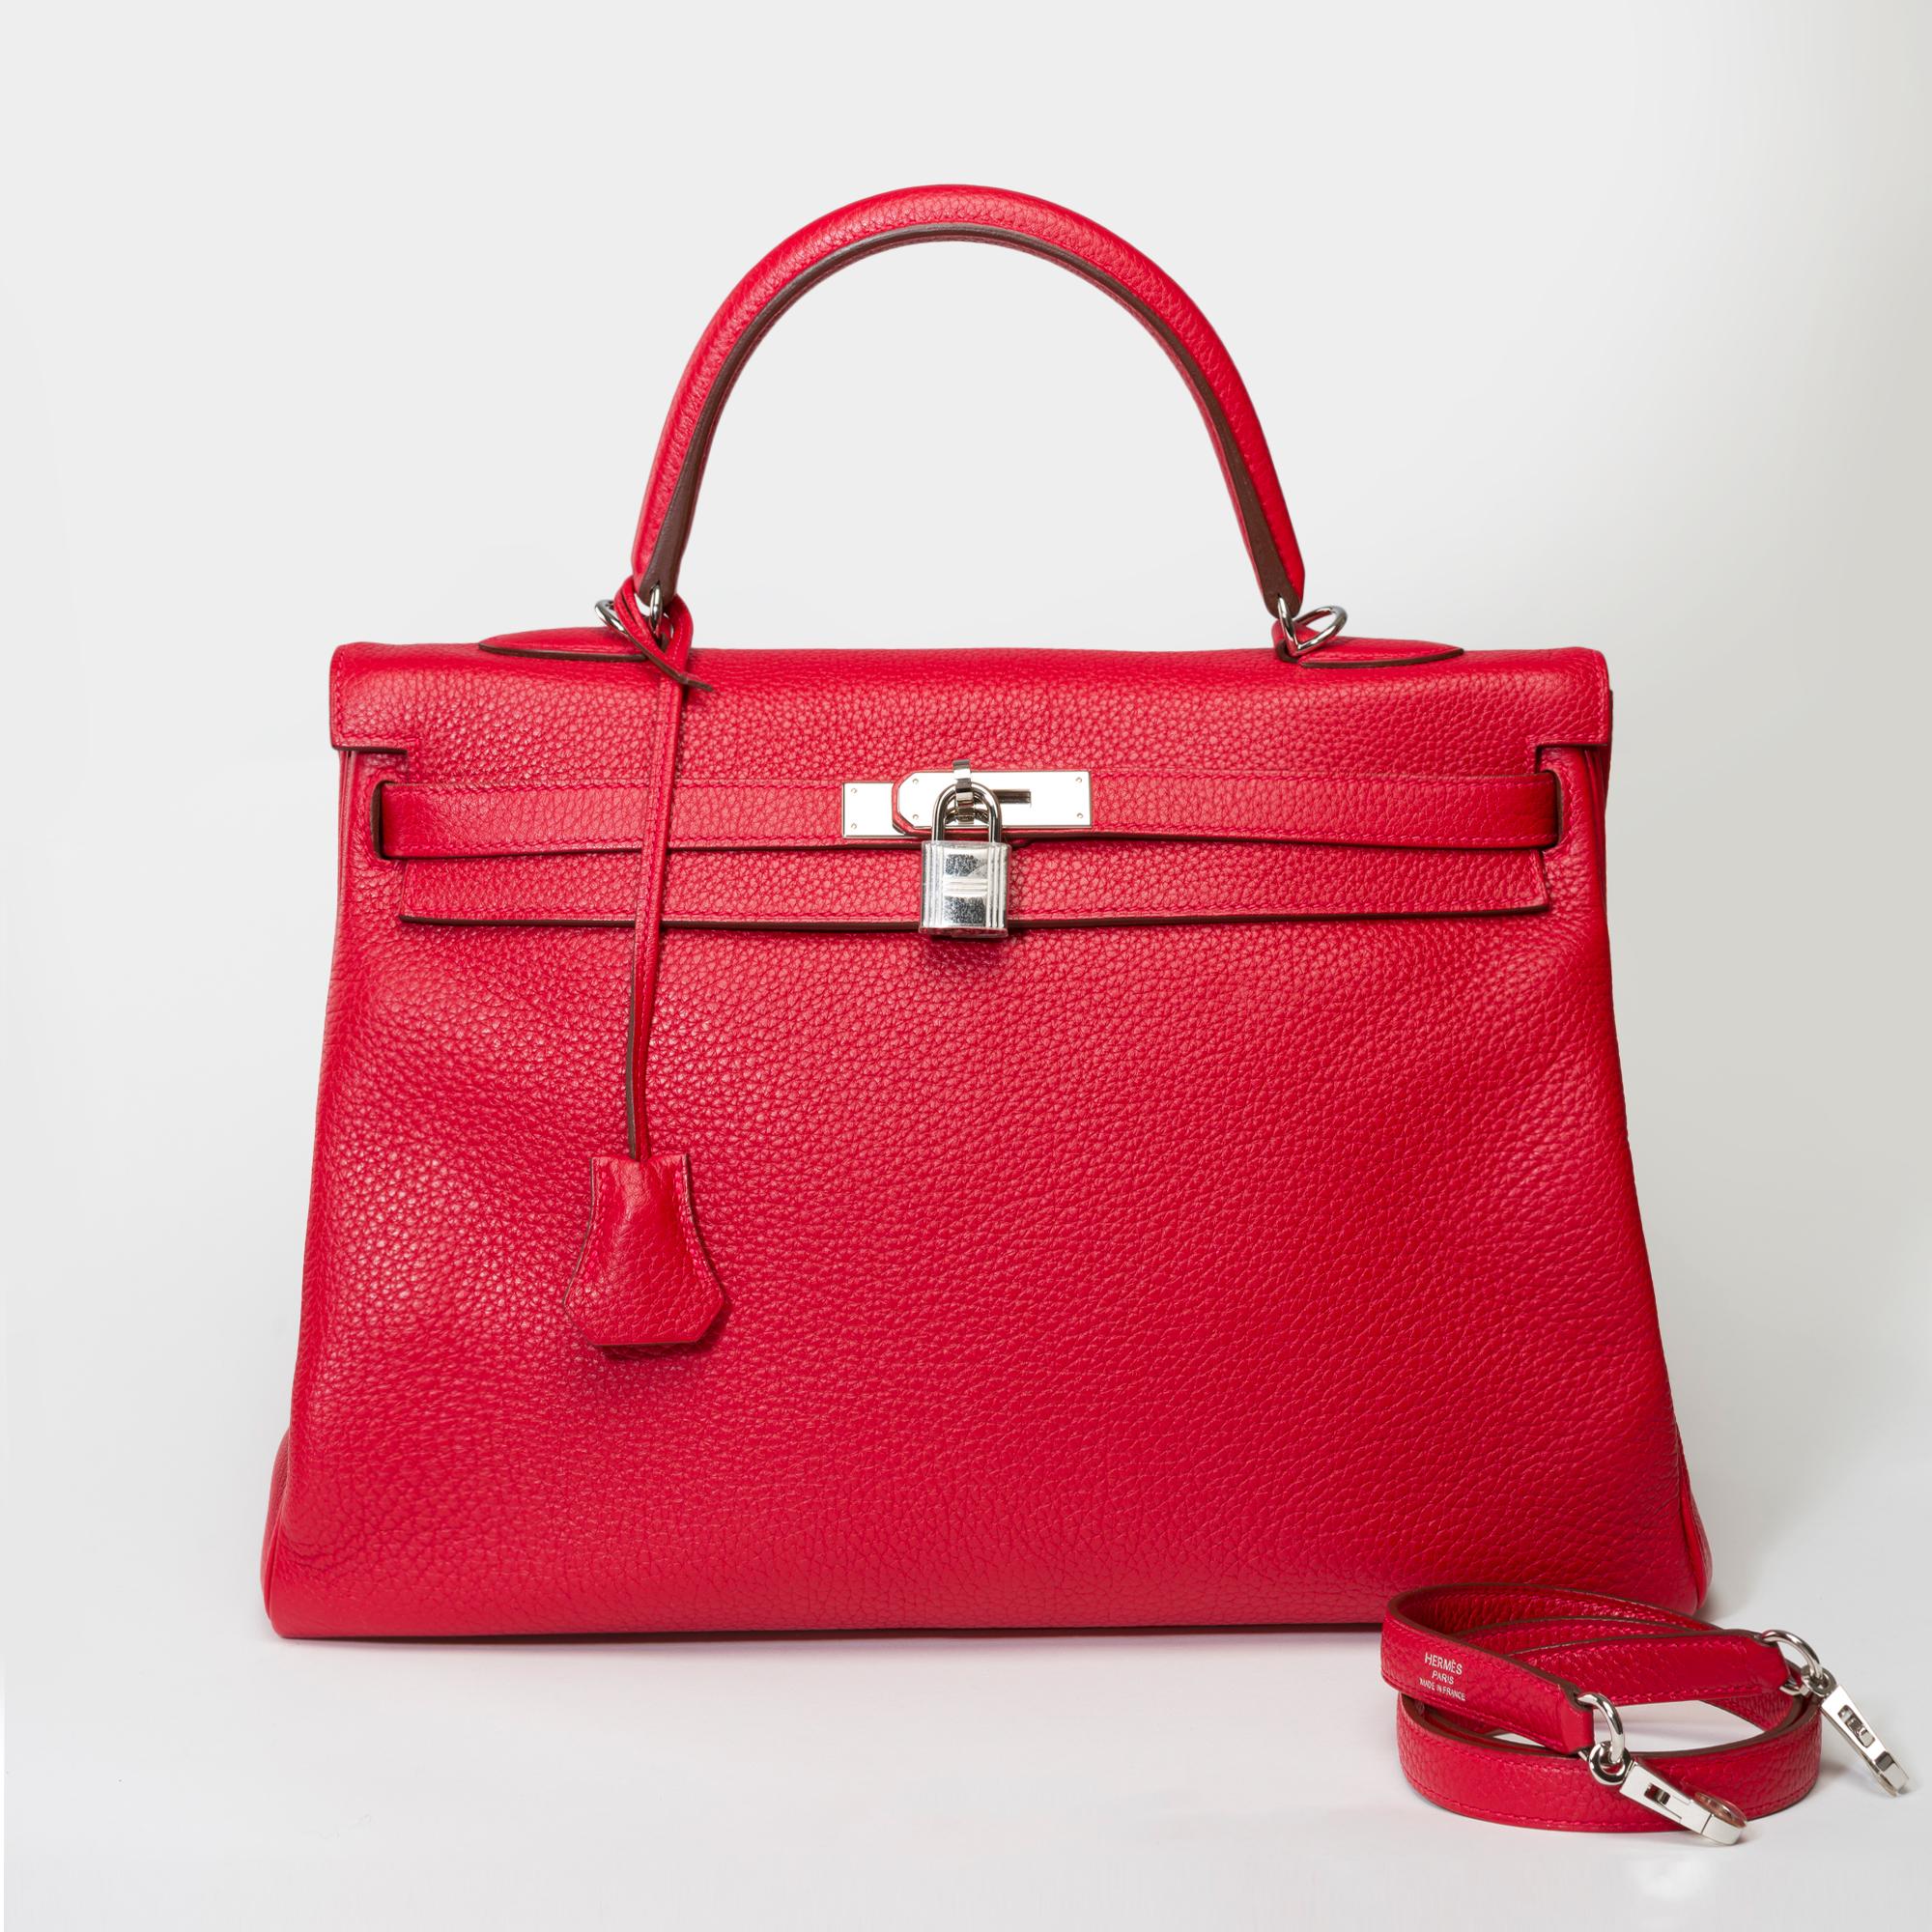 Bright Hermes Kelly 35 retourne handbag strap in Red Taurillon Clemence leather, palladium silver metal hardware, red leather handle, removable leather handle in red Taurillon Clemence for hand, shoulder or crossbody carry

Flap closure
Red leather